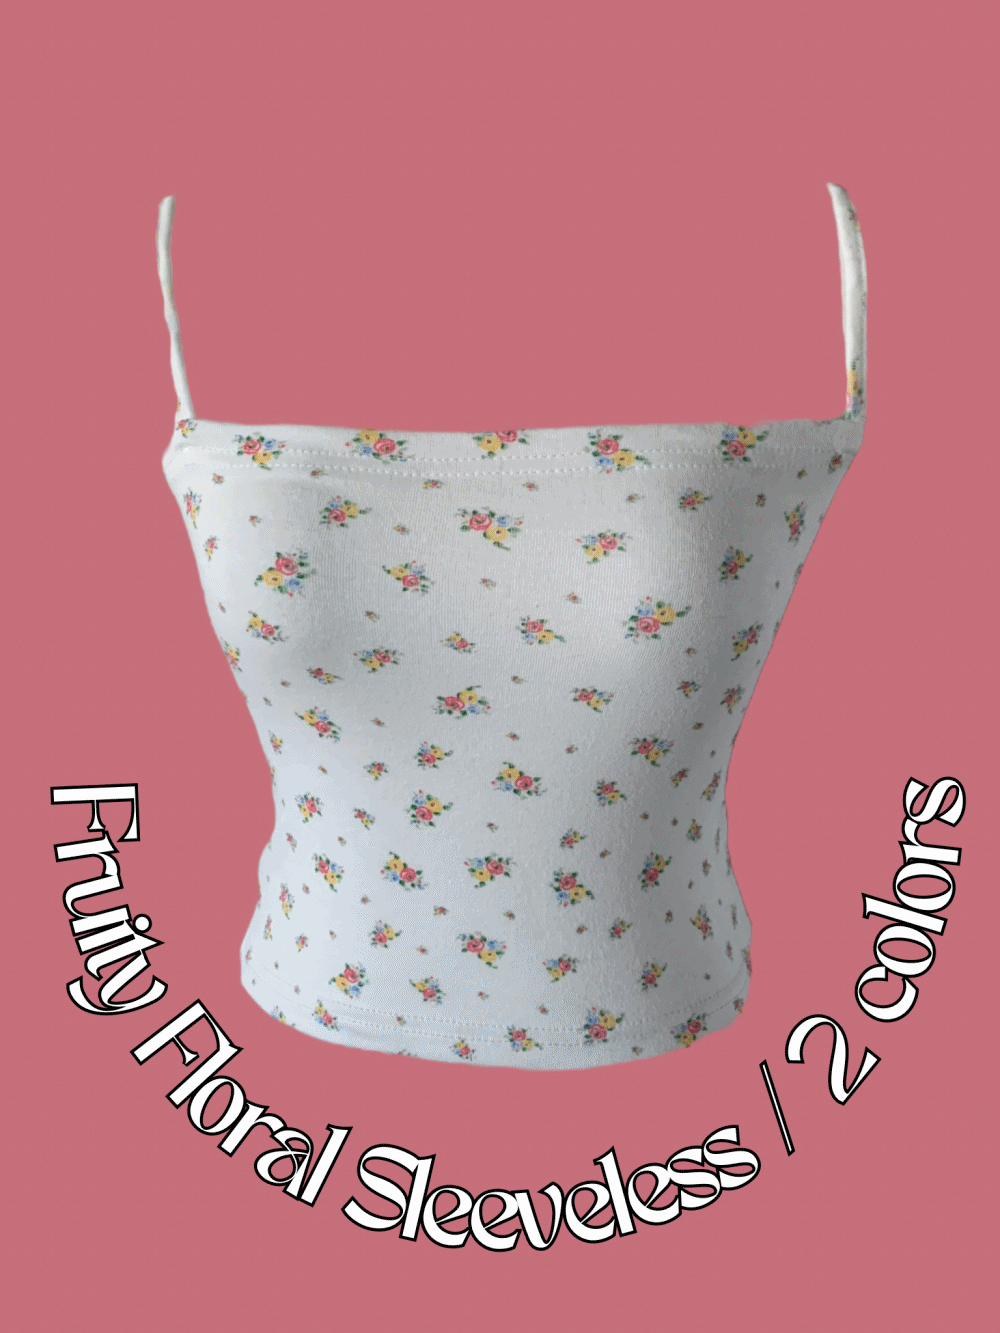 [Top/ Innerwear] Fruity Floral Sleeveless / 2 colors